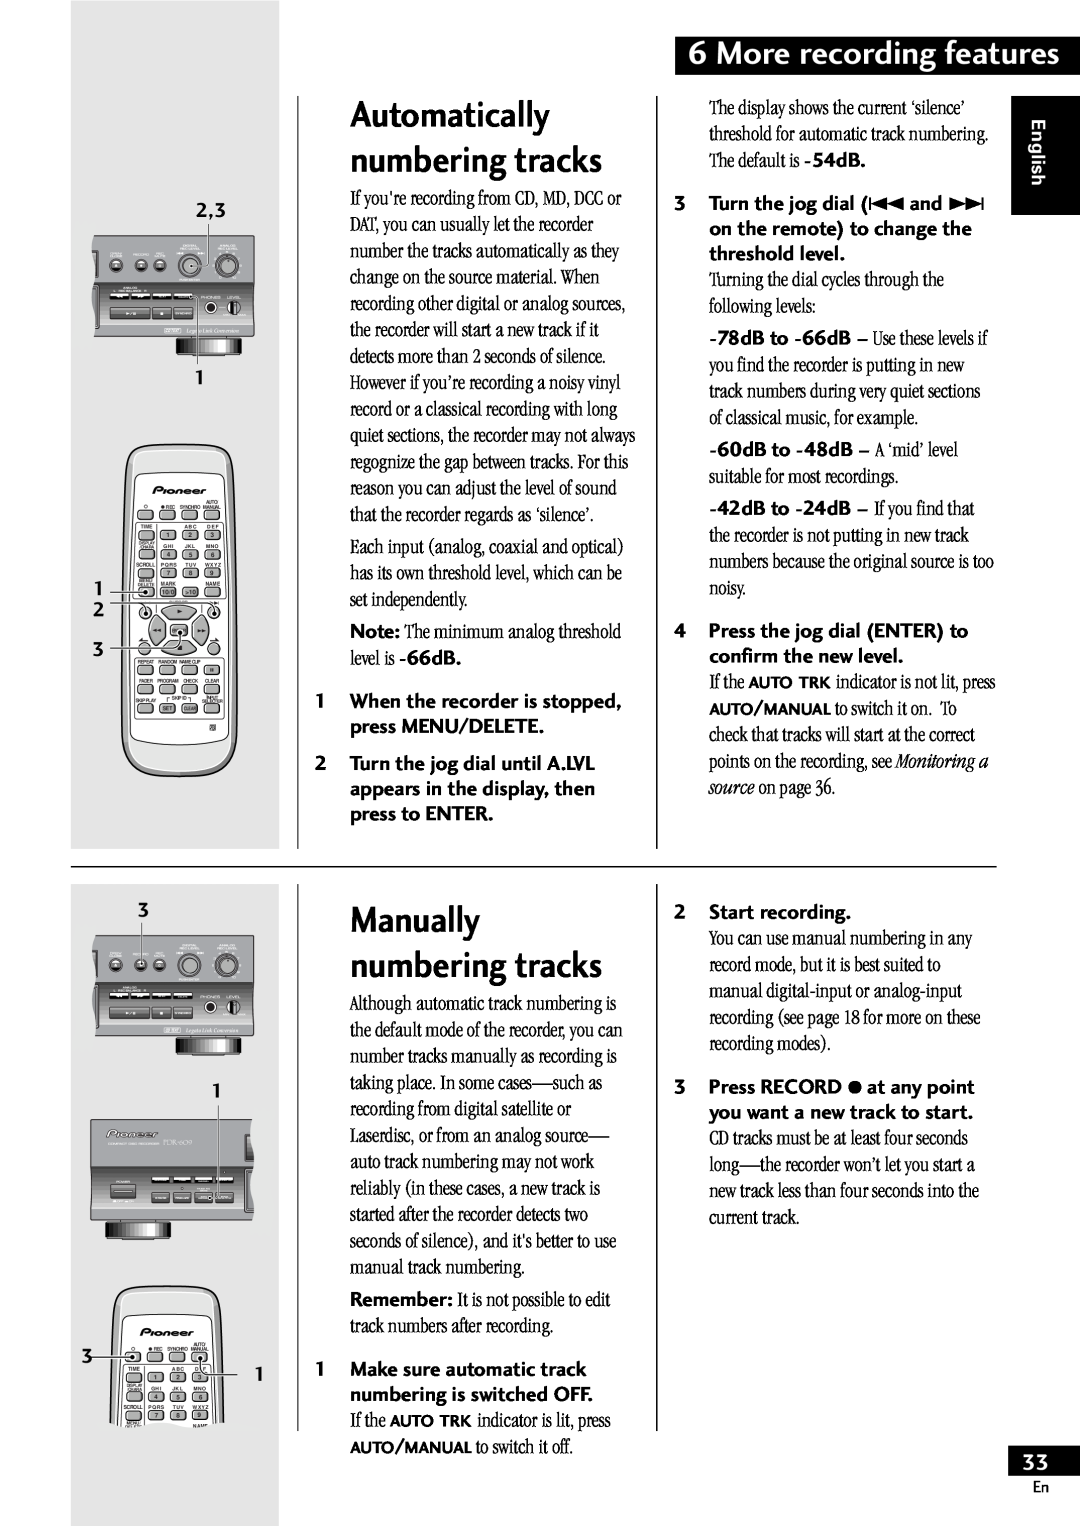 Pioneer PDR-609 operating instructions Automatically numbering tracks, Manually numbering tracks, More recording features 